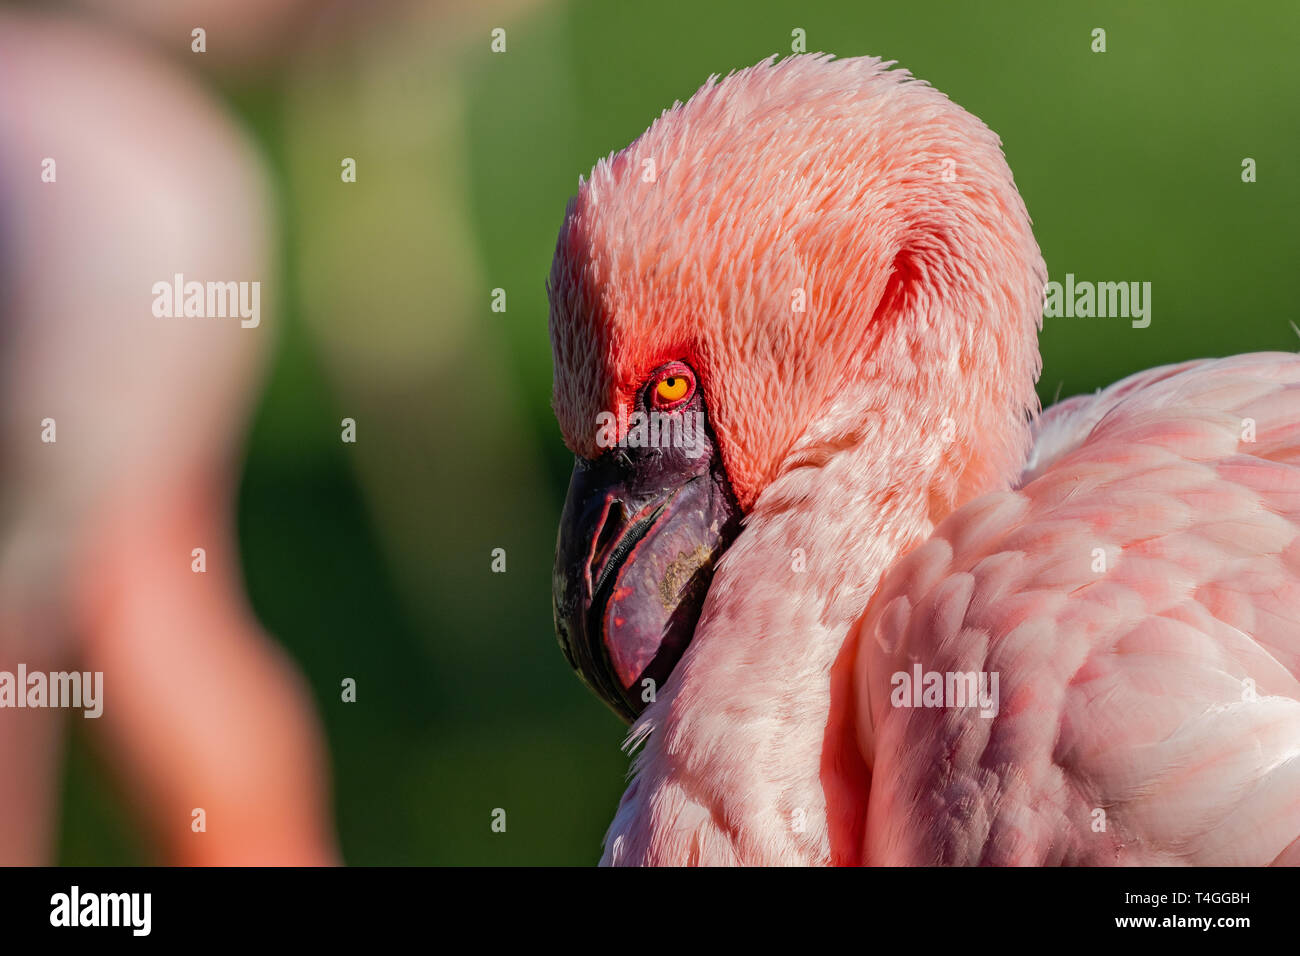 Chilean flamingo (Phoenicopterus chilensis) portrait with green background. Stock Photo